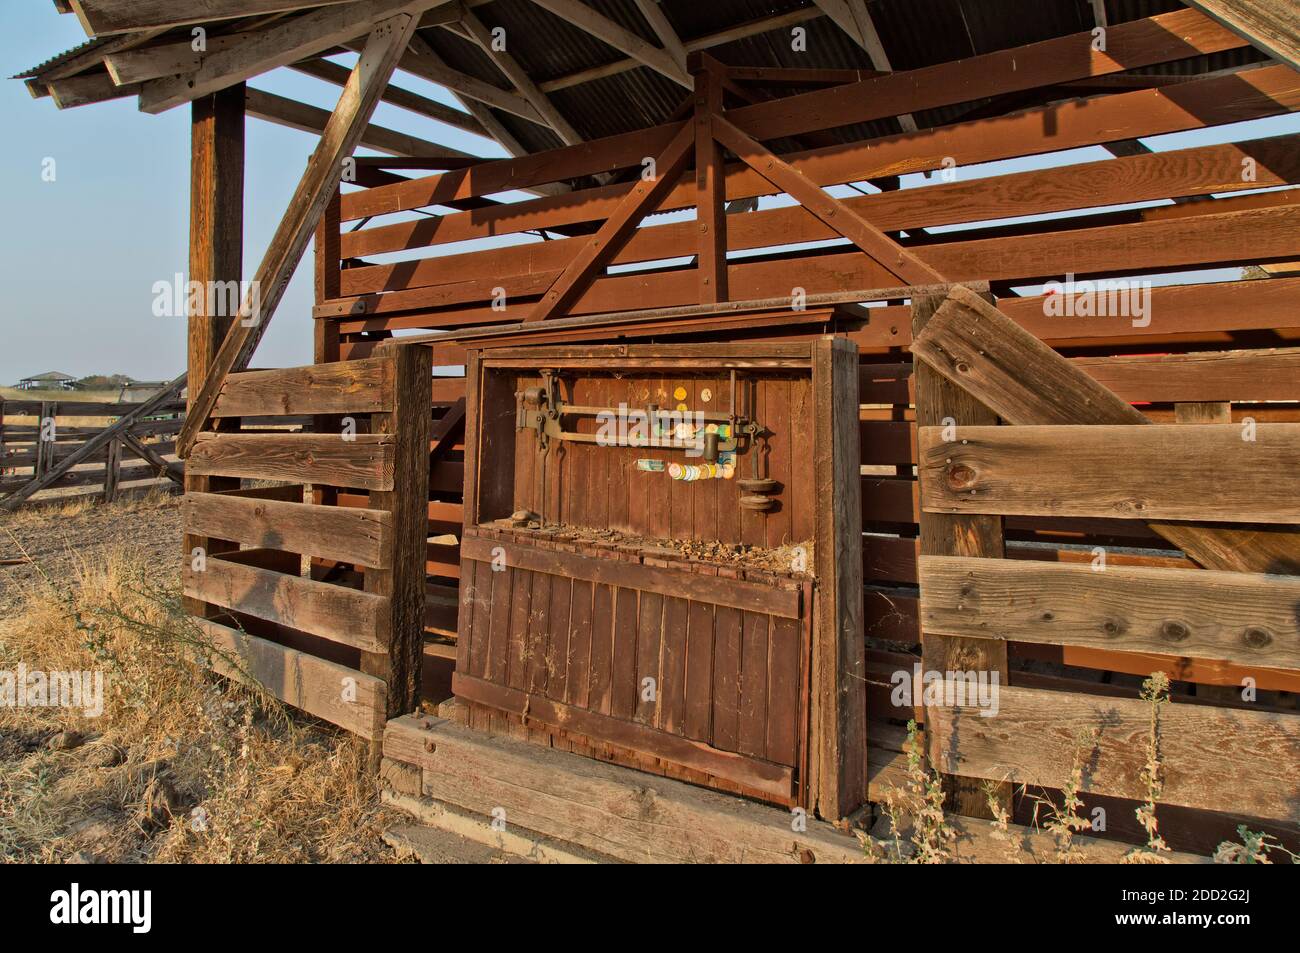 Antiquated  'In Ground' Livestock Scalehouse in disrepair, certification Weights & Measures seals 1959 - 2001. Abandoned Historical farm equipment. Stock Photo